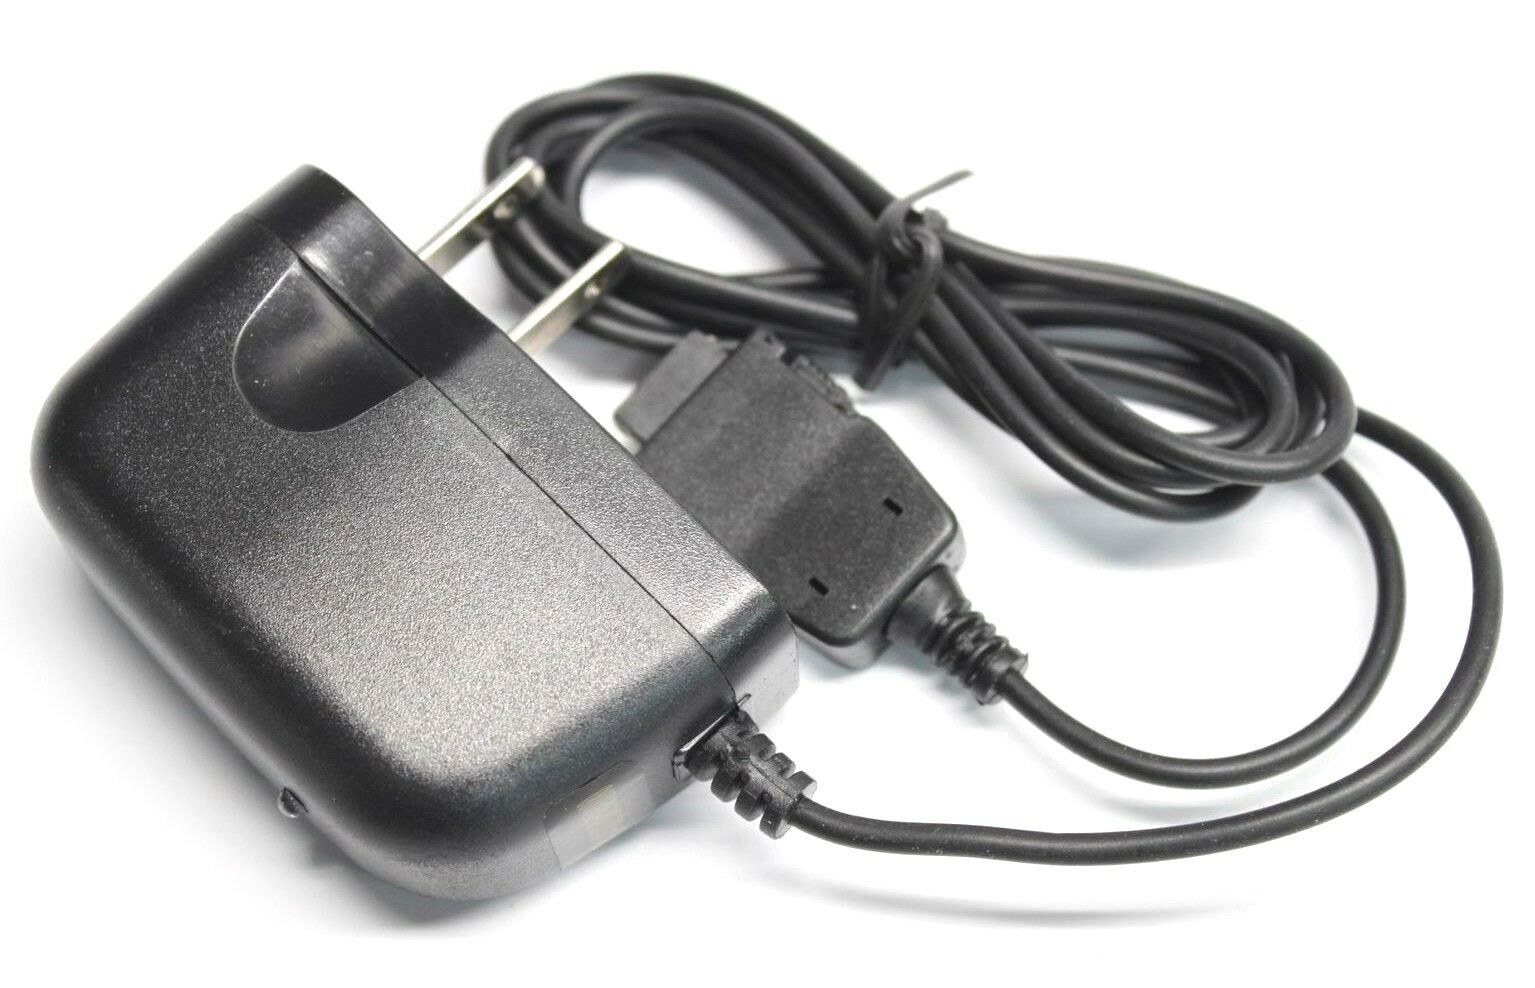 LG VX4400 Ac Adapter Power Supply Cord Cable Charger